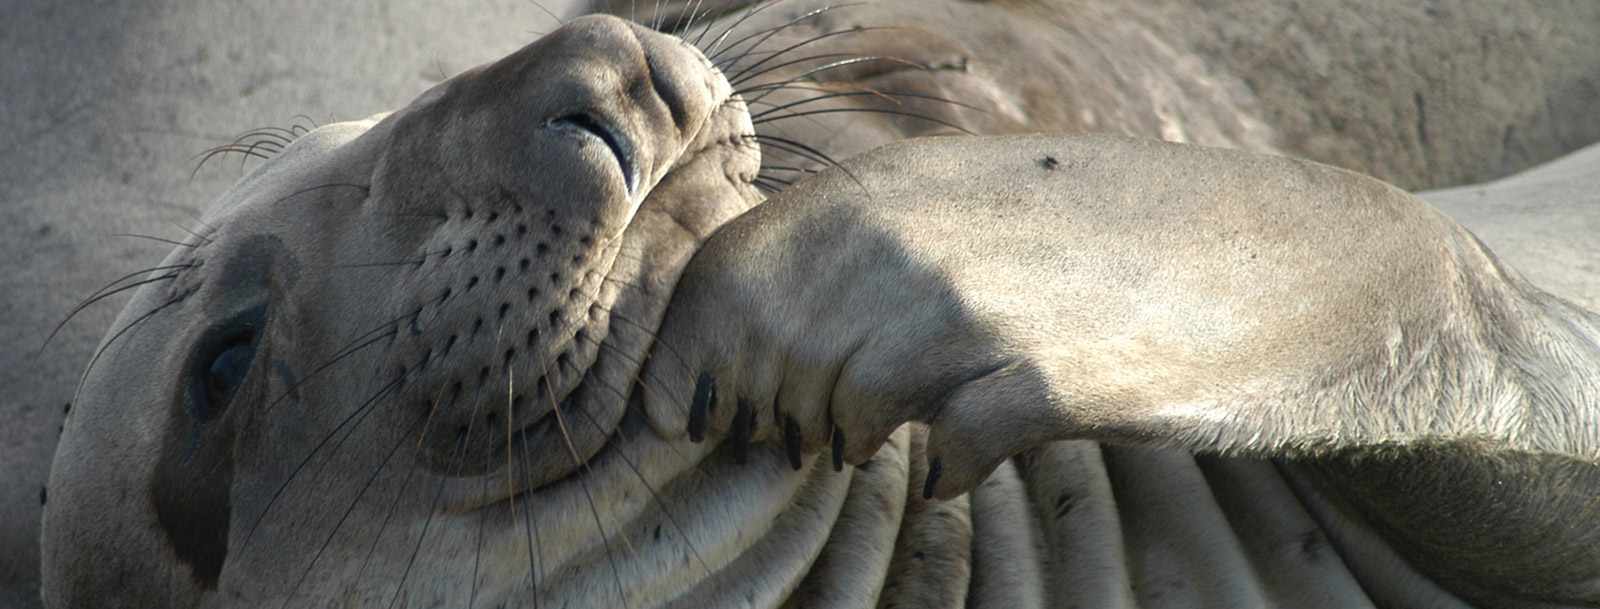 photo of a northern elephant seal up close